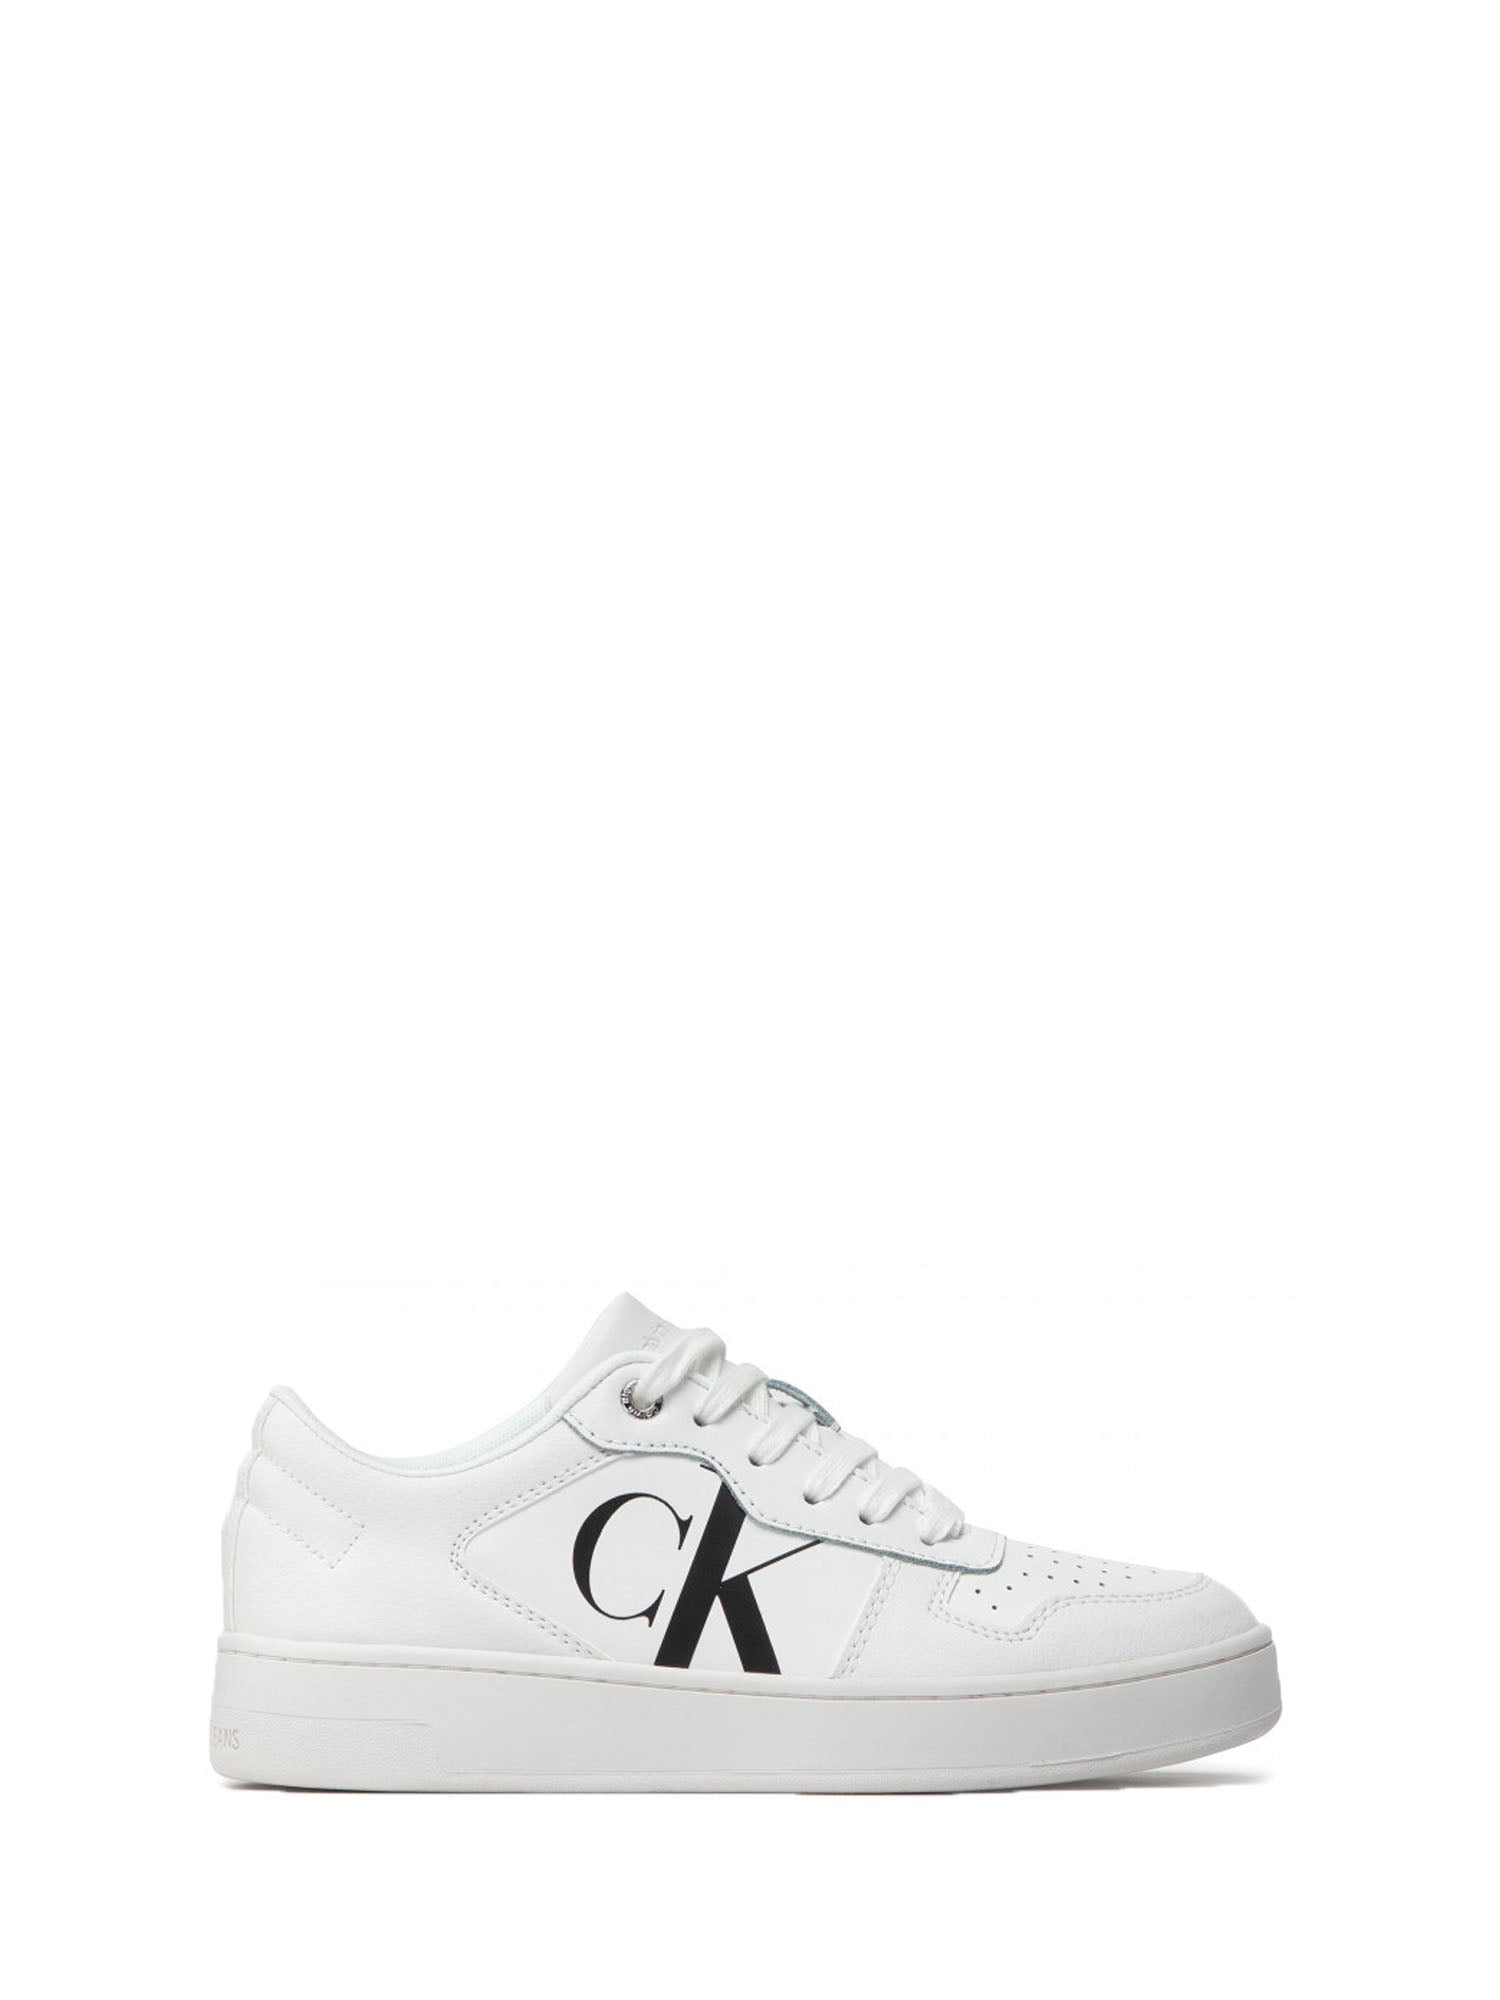 CALVIN KLEIN SNEAKERS CUPSOLE LACEUP BASKET LOW BIANCO - NERO